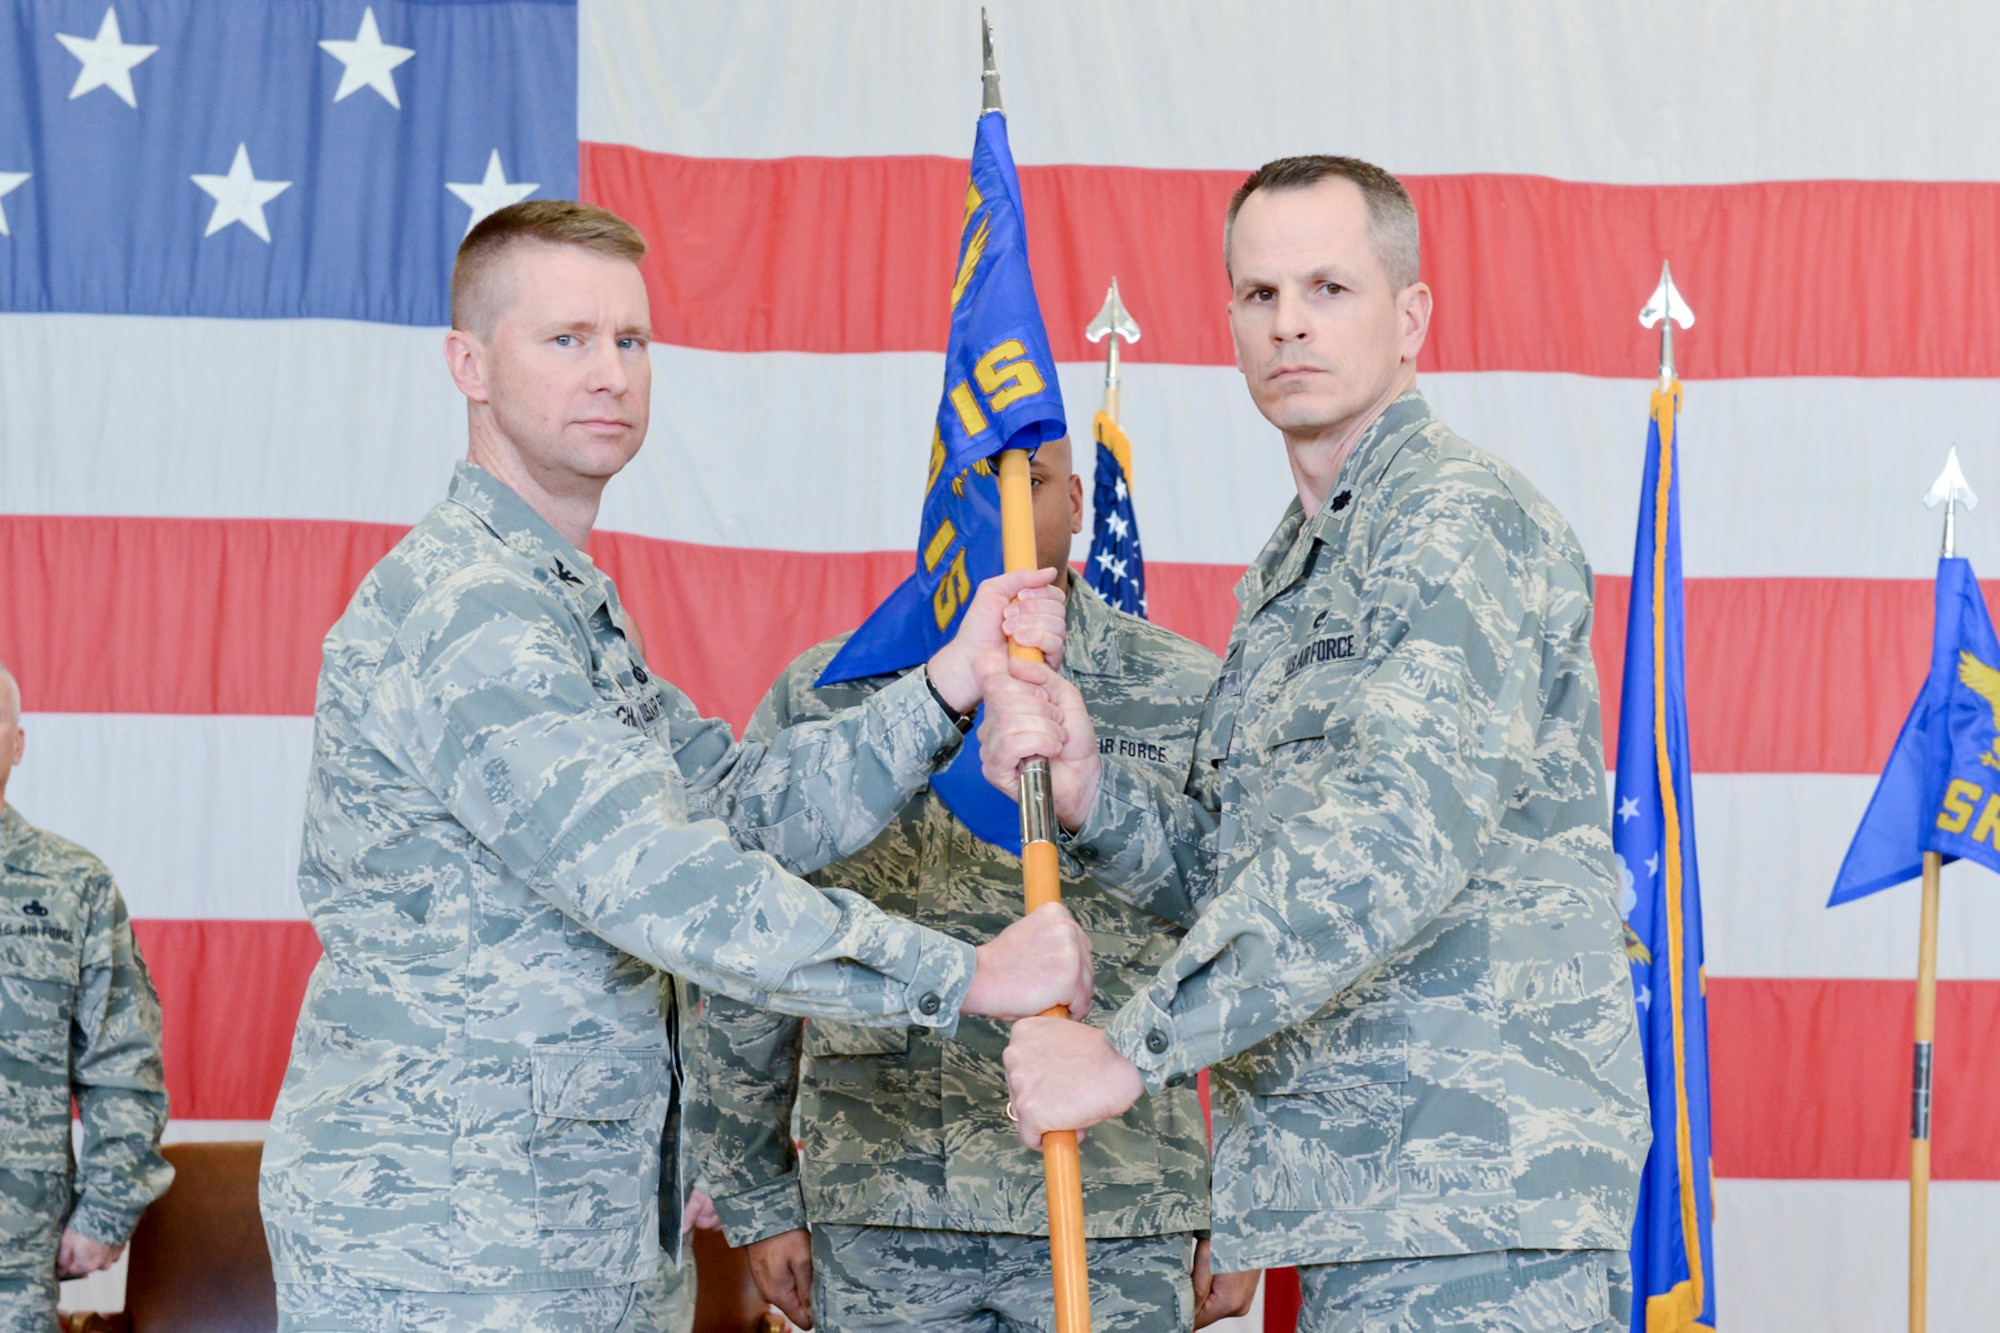 Col. Mark Chidley (left), 132d Wing (132WG), Des Moines, Iowa  Intelligence Surveillance Reconnaissance Group (ISRG) Commander, passes the 233d Intelligence Squadron (233 IS) guidon to Lt. Col. Trenton Twedt (right), 233 IS Commander, during the 132WG ISRG Activation Ceremony held in the 132WG Fire House on Saturday, March 7, 2015.  This ceremony formally recognizes the official activation of the 132WG ISRG.  (U.S. Air National Guard photo by Staff Sgt. Linda K. Burger/Released)